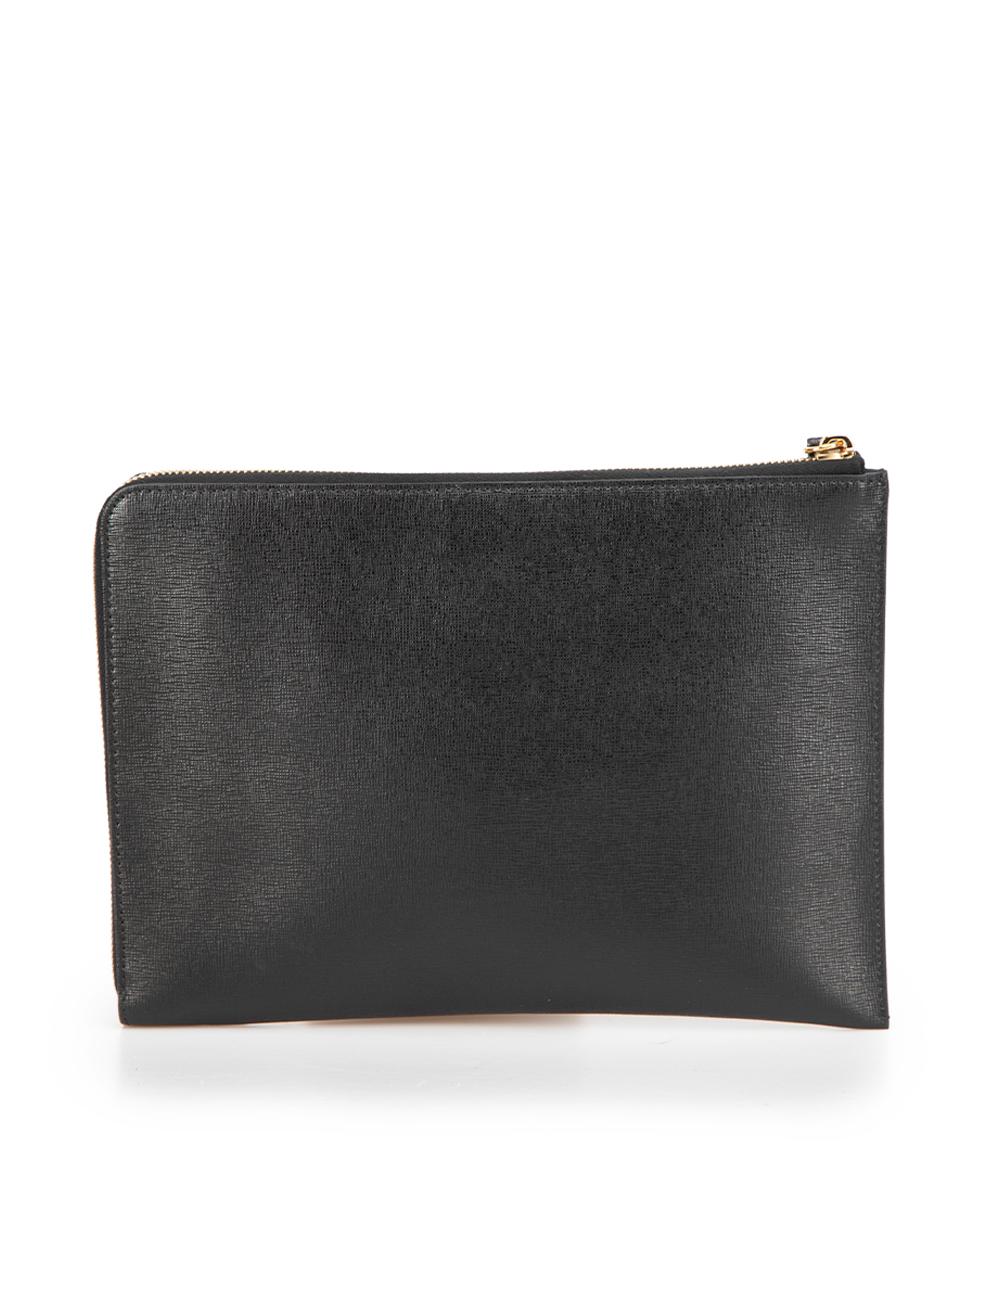 Fendi Women's Black Leather Monster Stud Small Pouch In Good Condition For Sale In London, GB